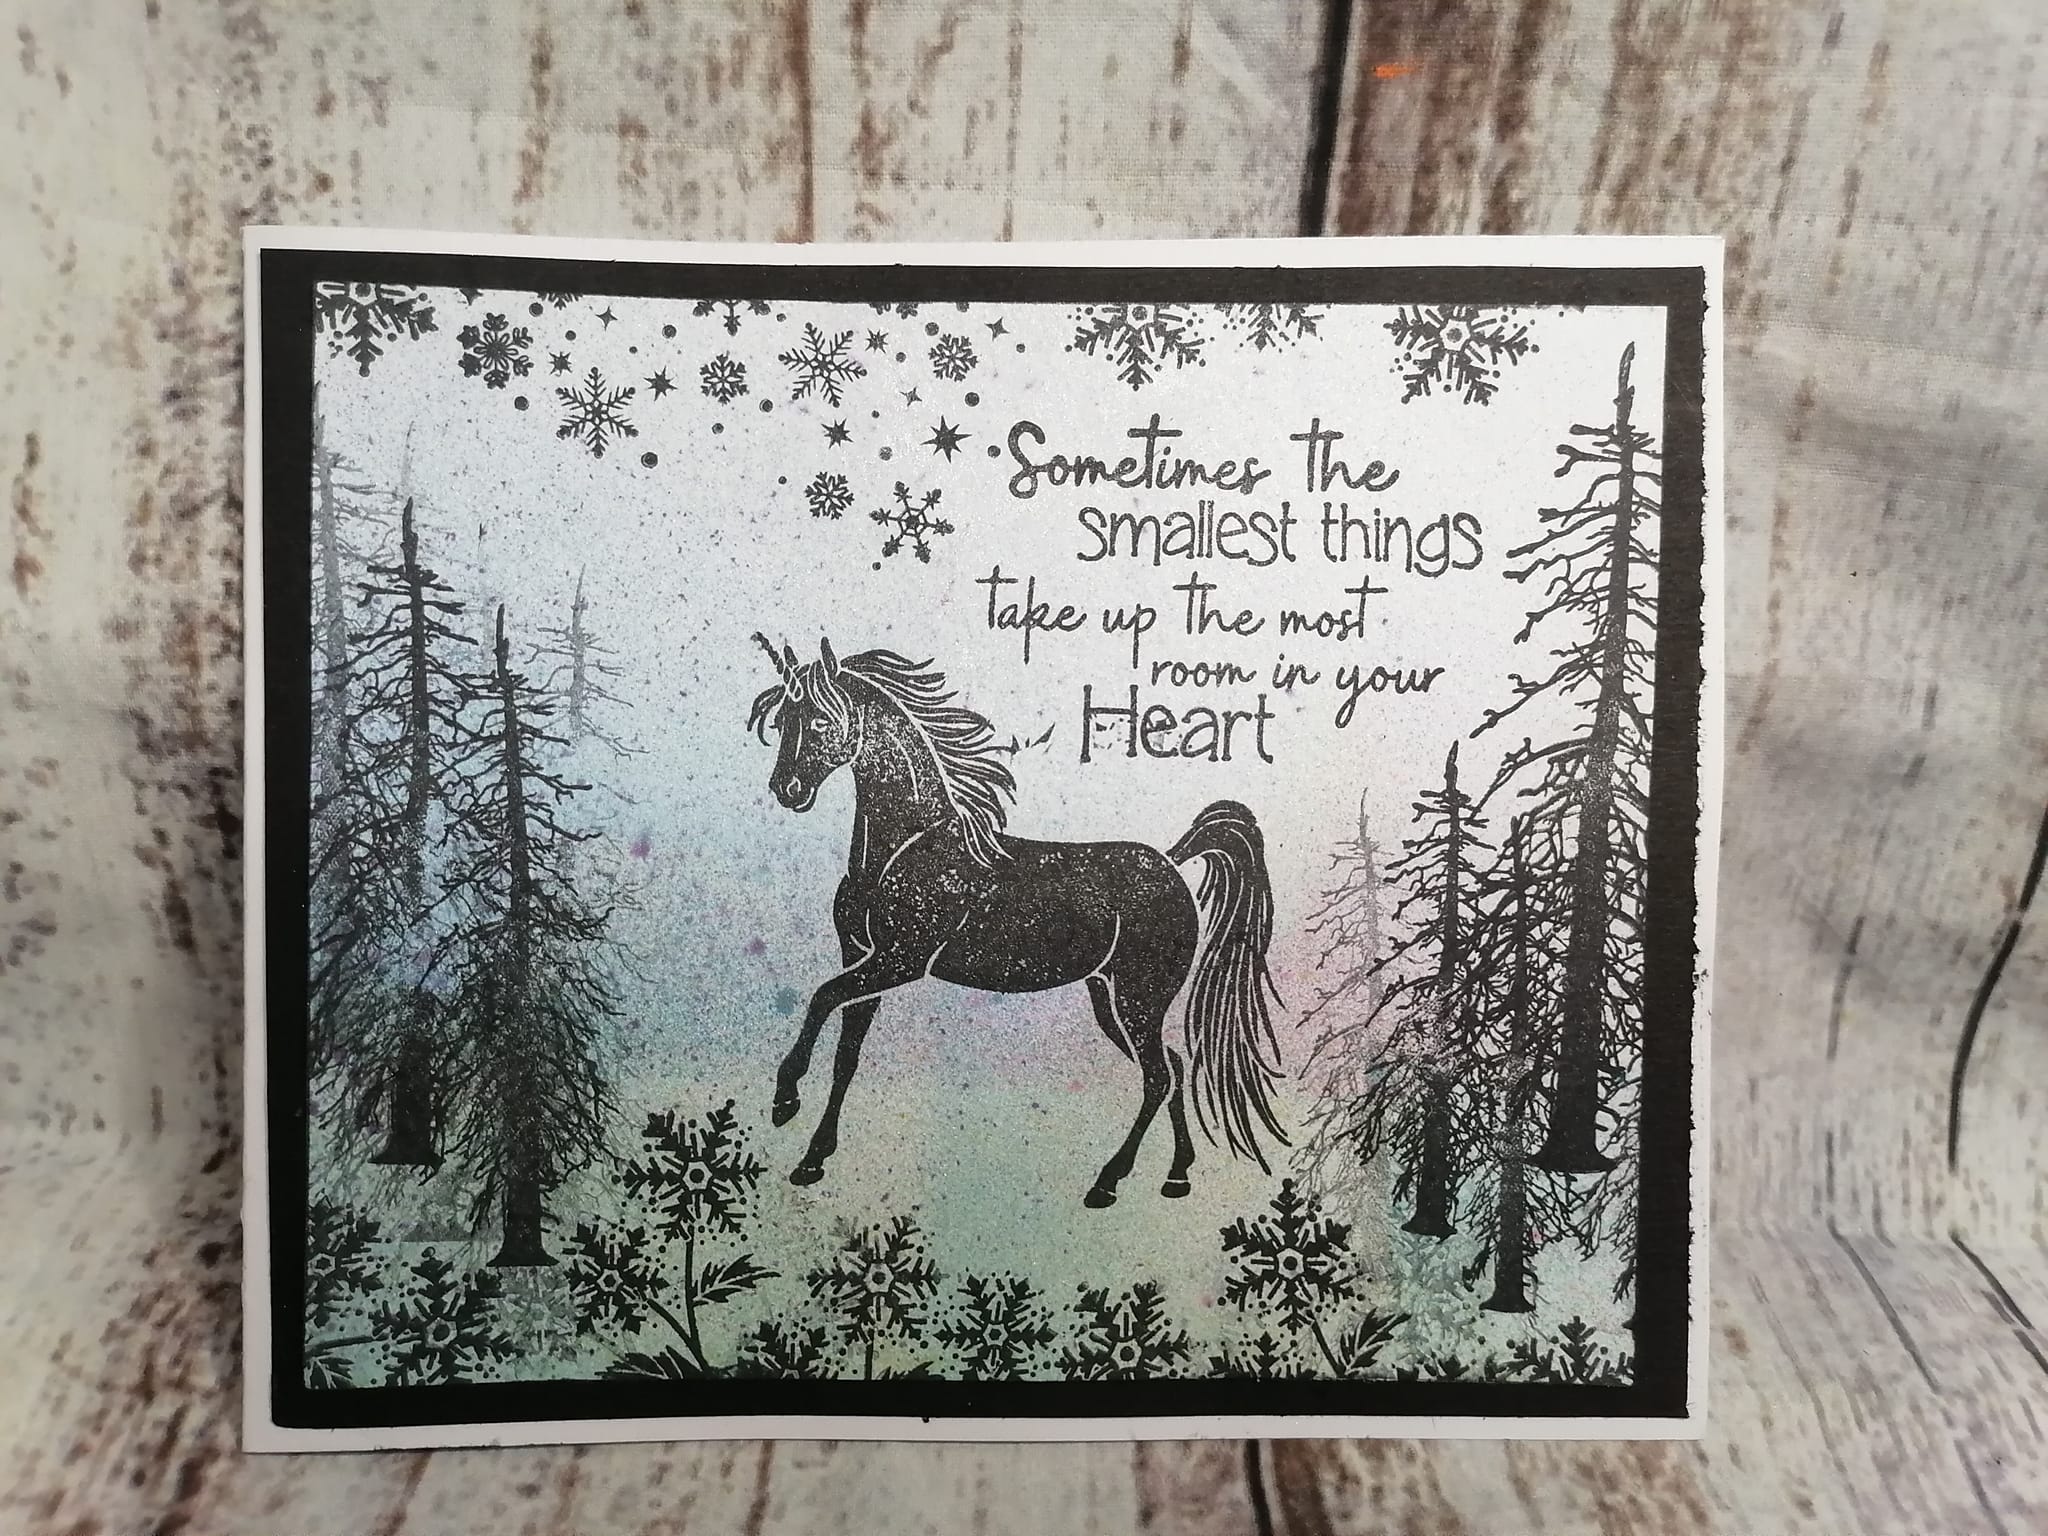 Fairy Hugs Stamps - Smallest Things